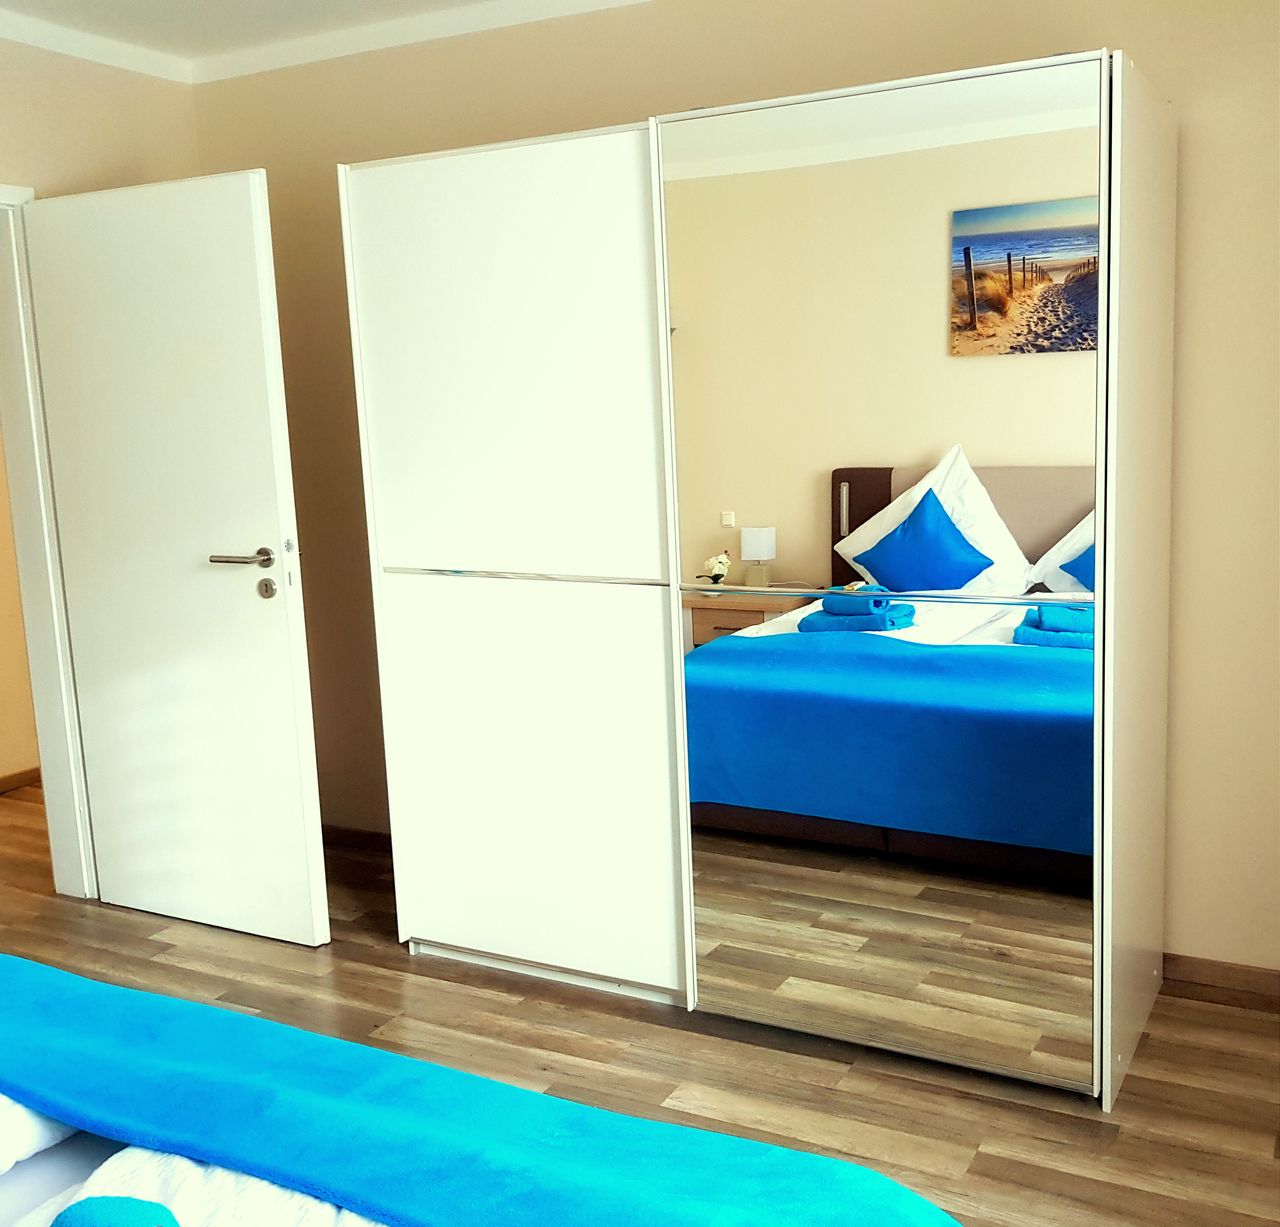 All inclusive: WiFi,TV, Kitchen, Washing dryer